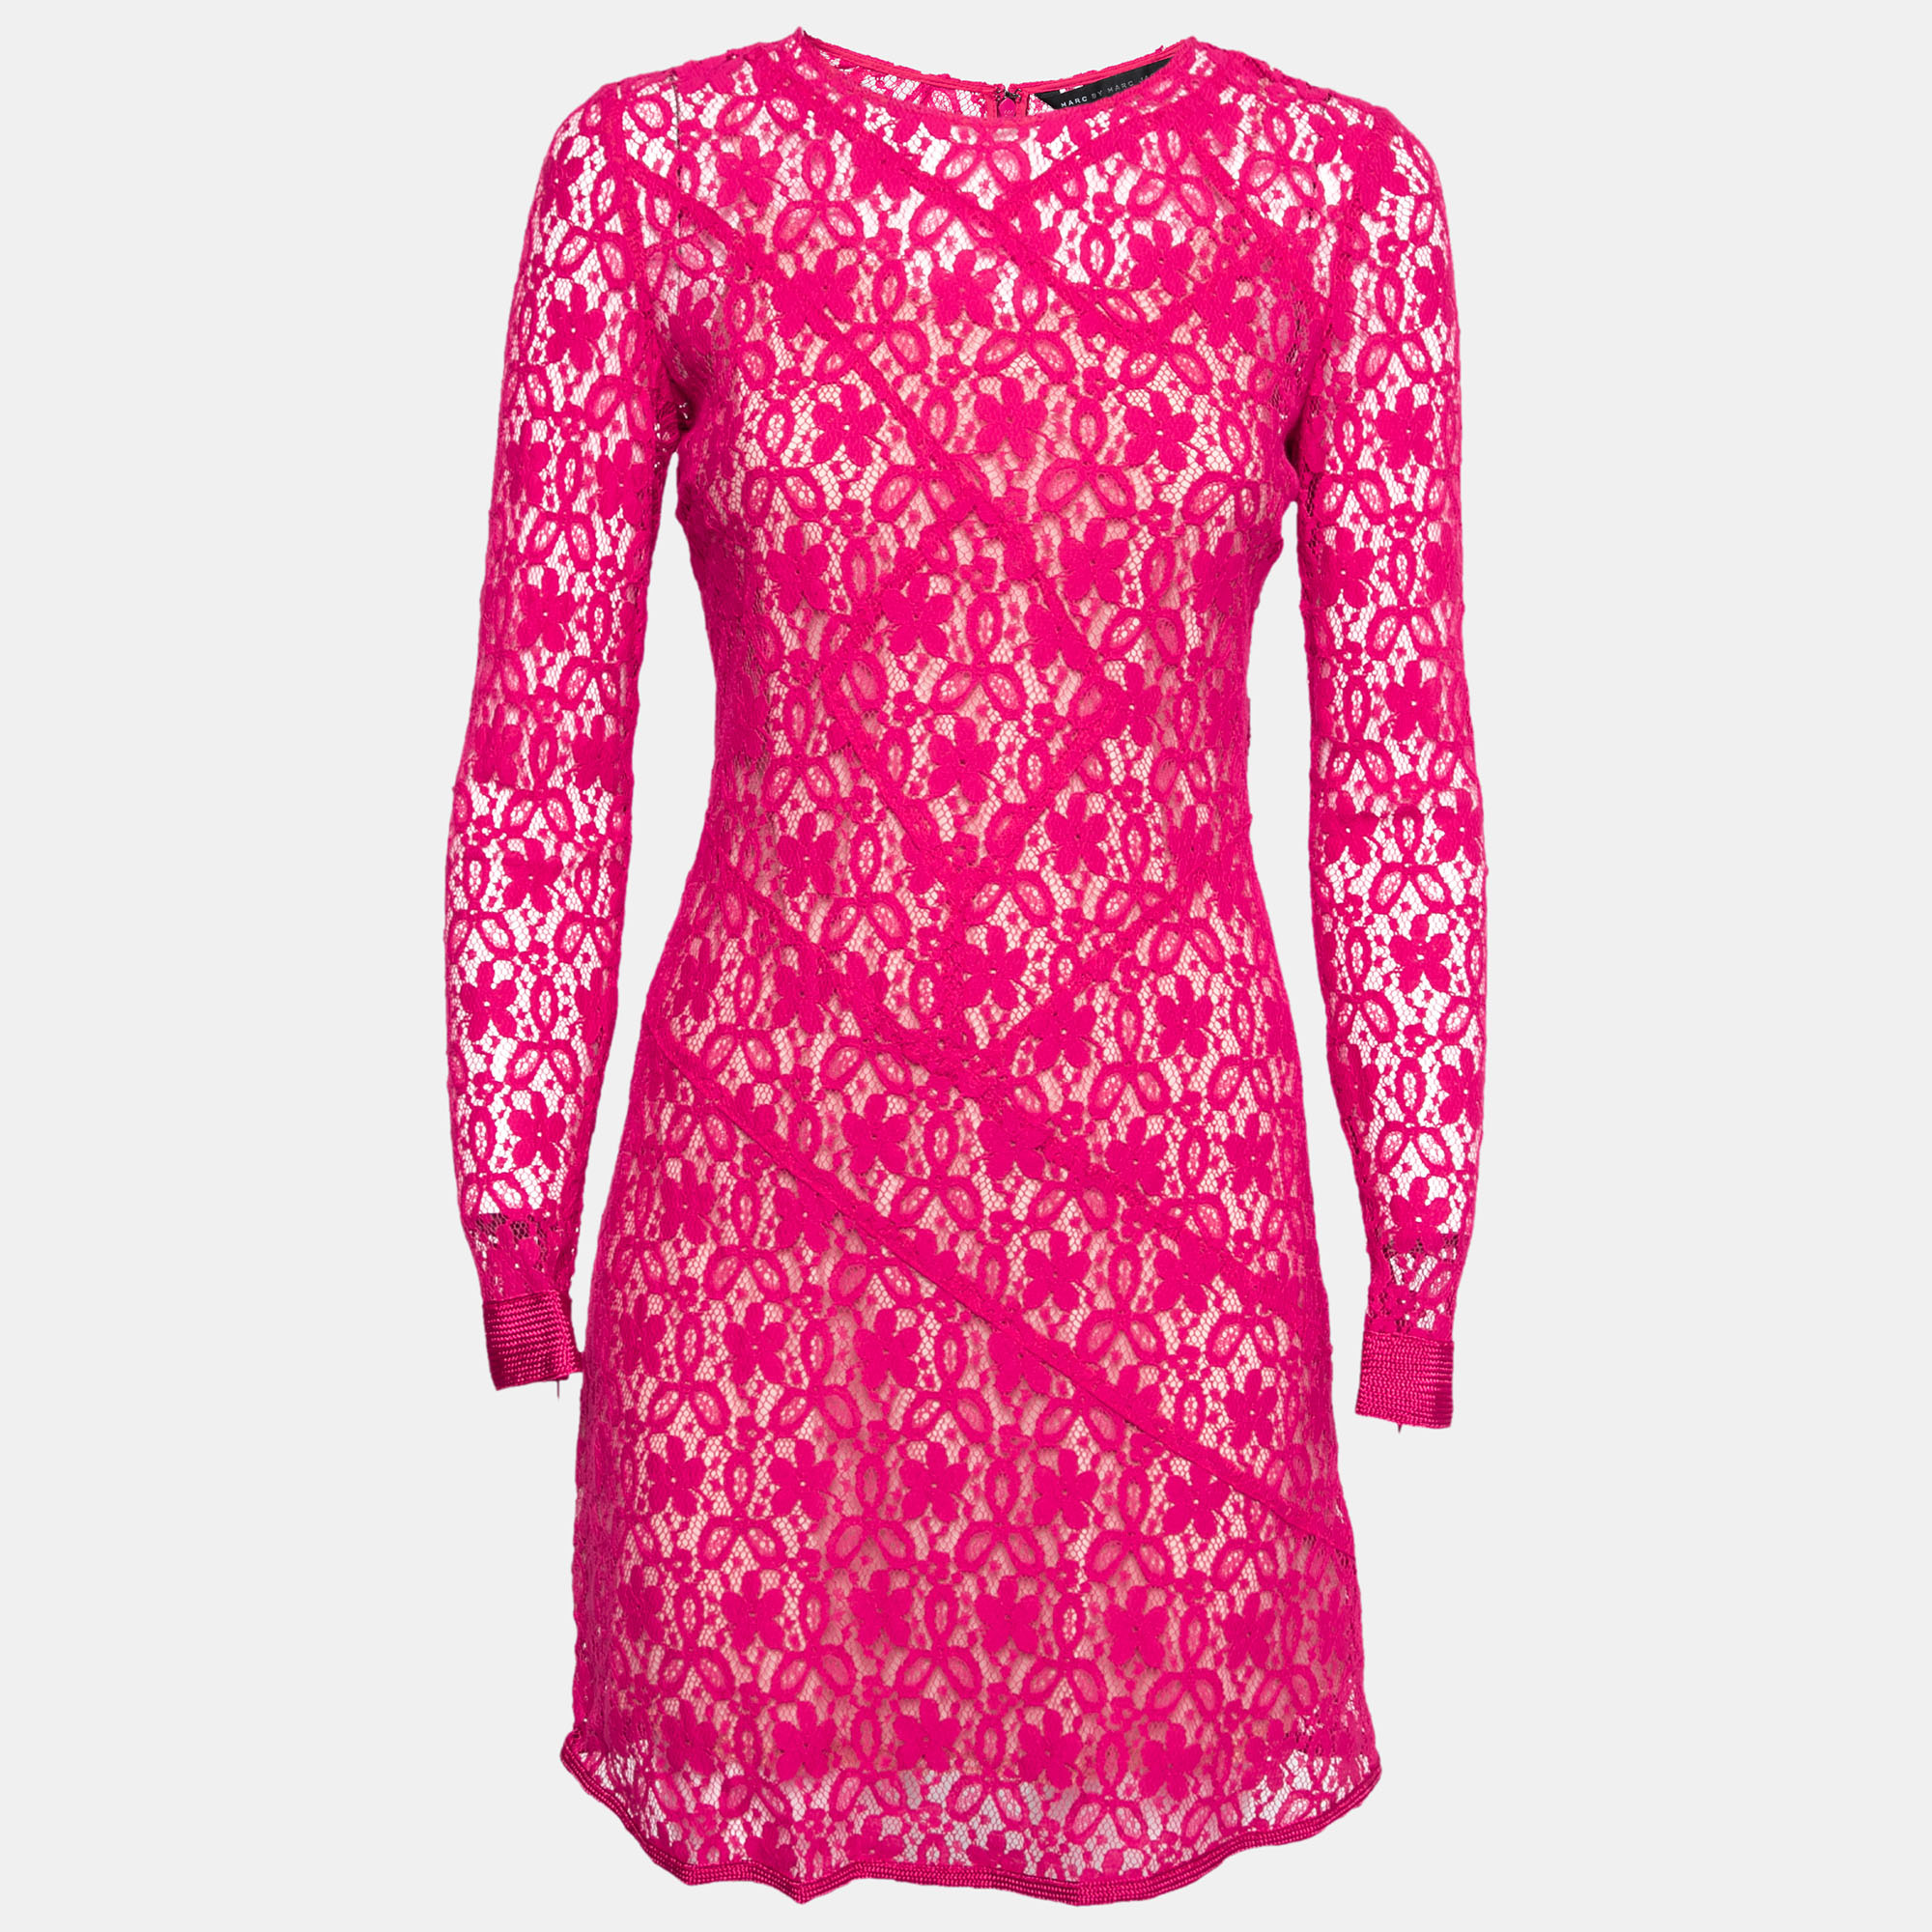 

Marc by Marc Jacobs Strawberry Daiquiri Floral Lace Paneled Leila Dress, Pink